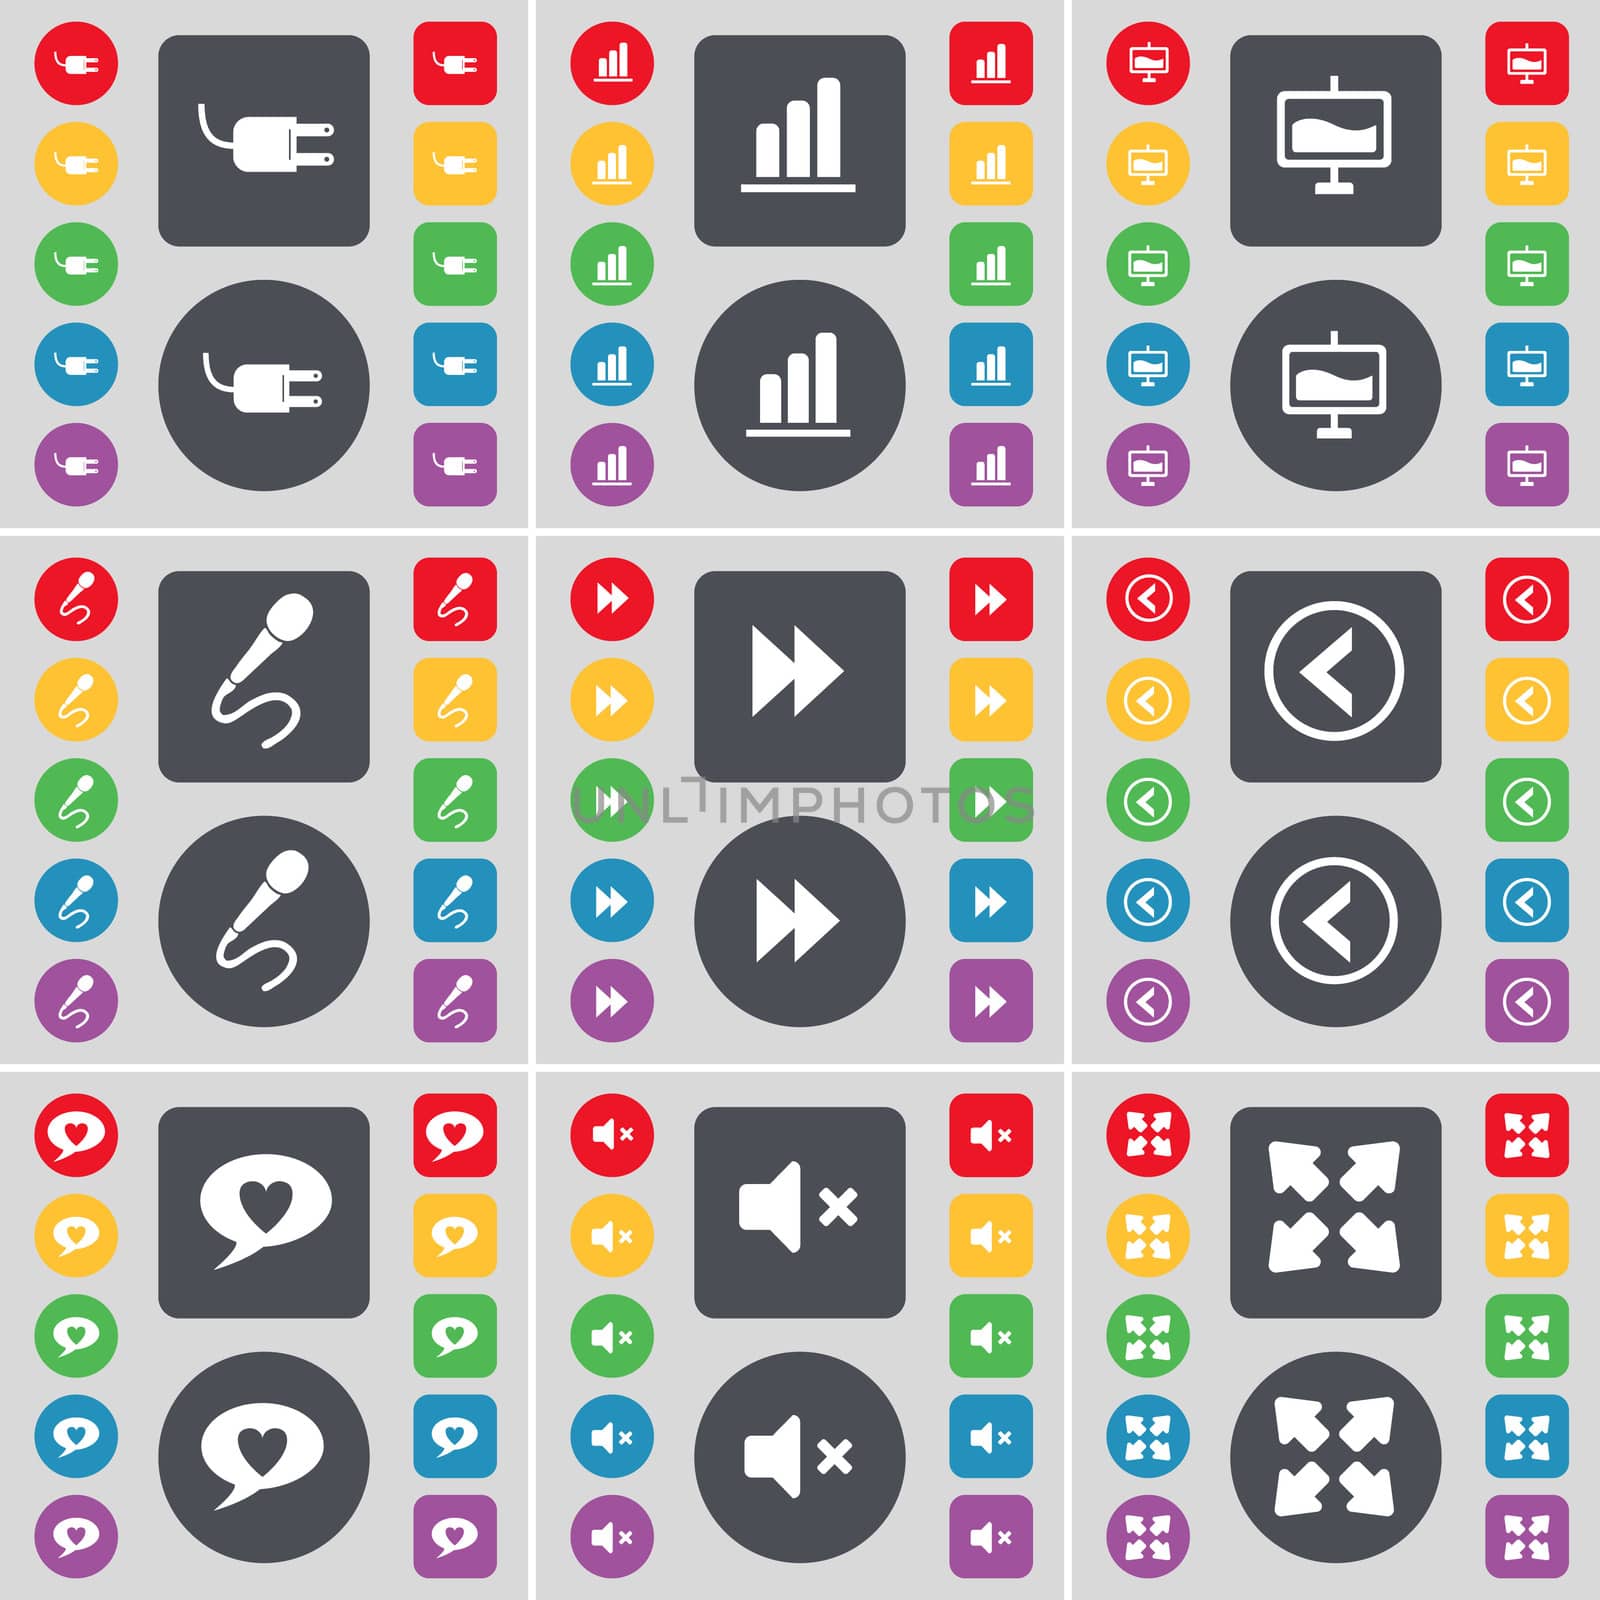 Socket, Diagram, Graph, Microphone, Rewind, Arrow left, Chat bubble, Mute, Full screen icon symbol. A large set of flat, colored buttons for your design. illustration